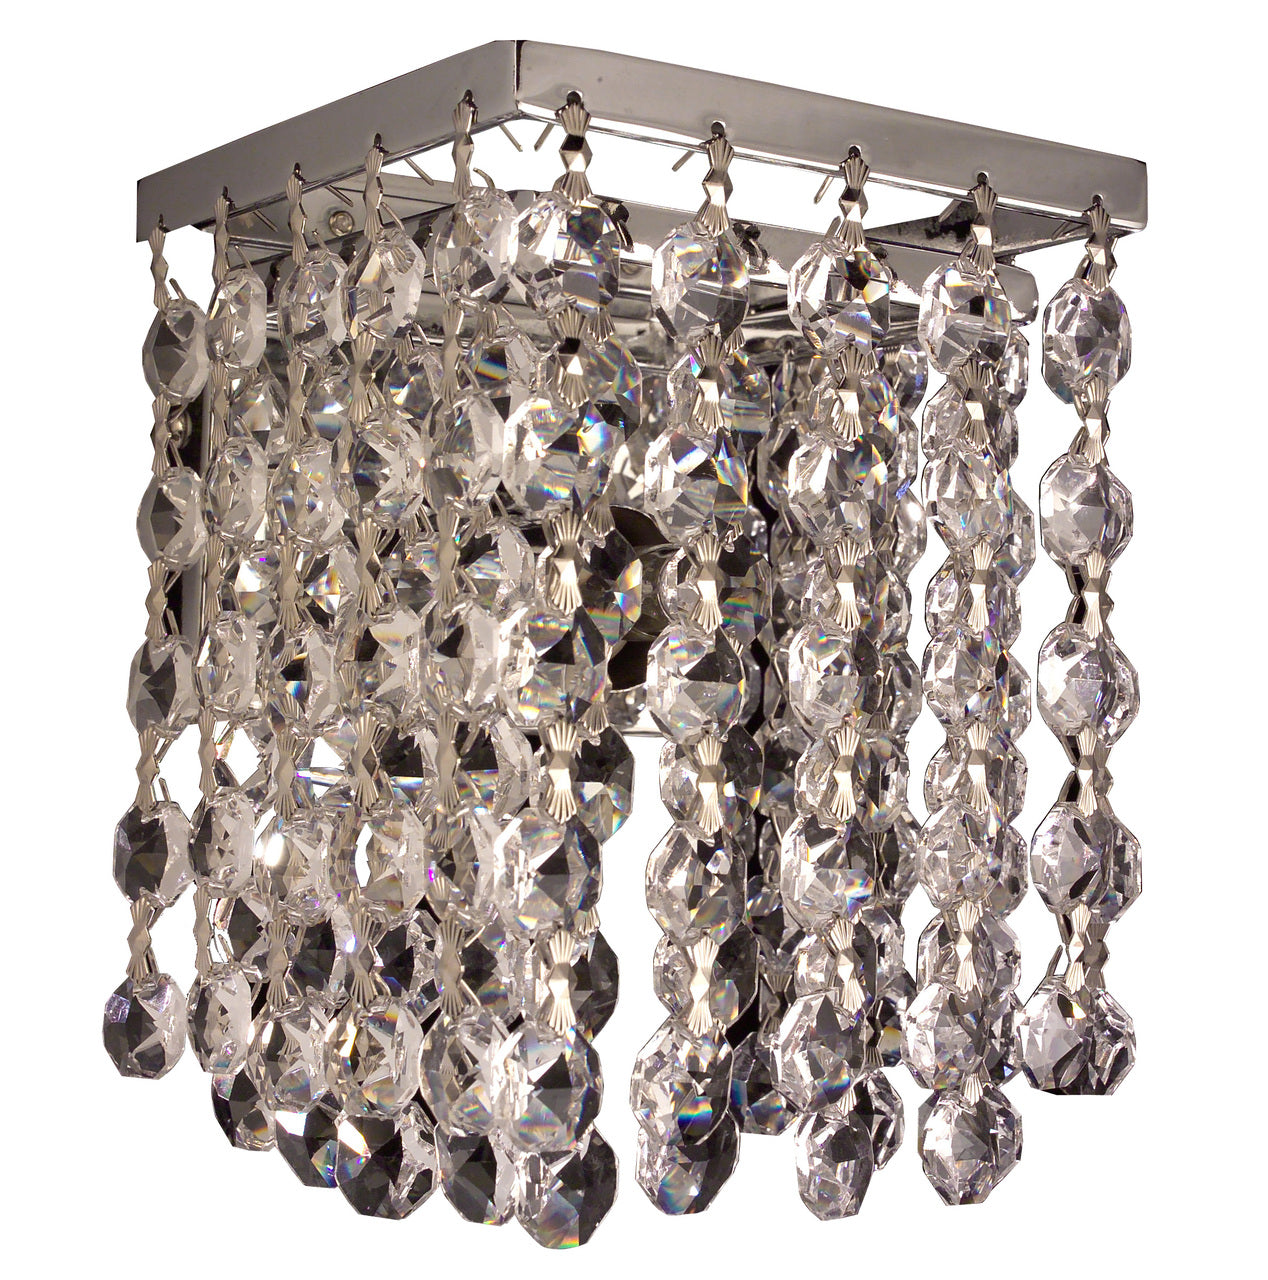 Classic Lighting 16102 AM-CP Bedazzle Crystal Wall Sconce in Chrome